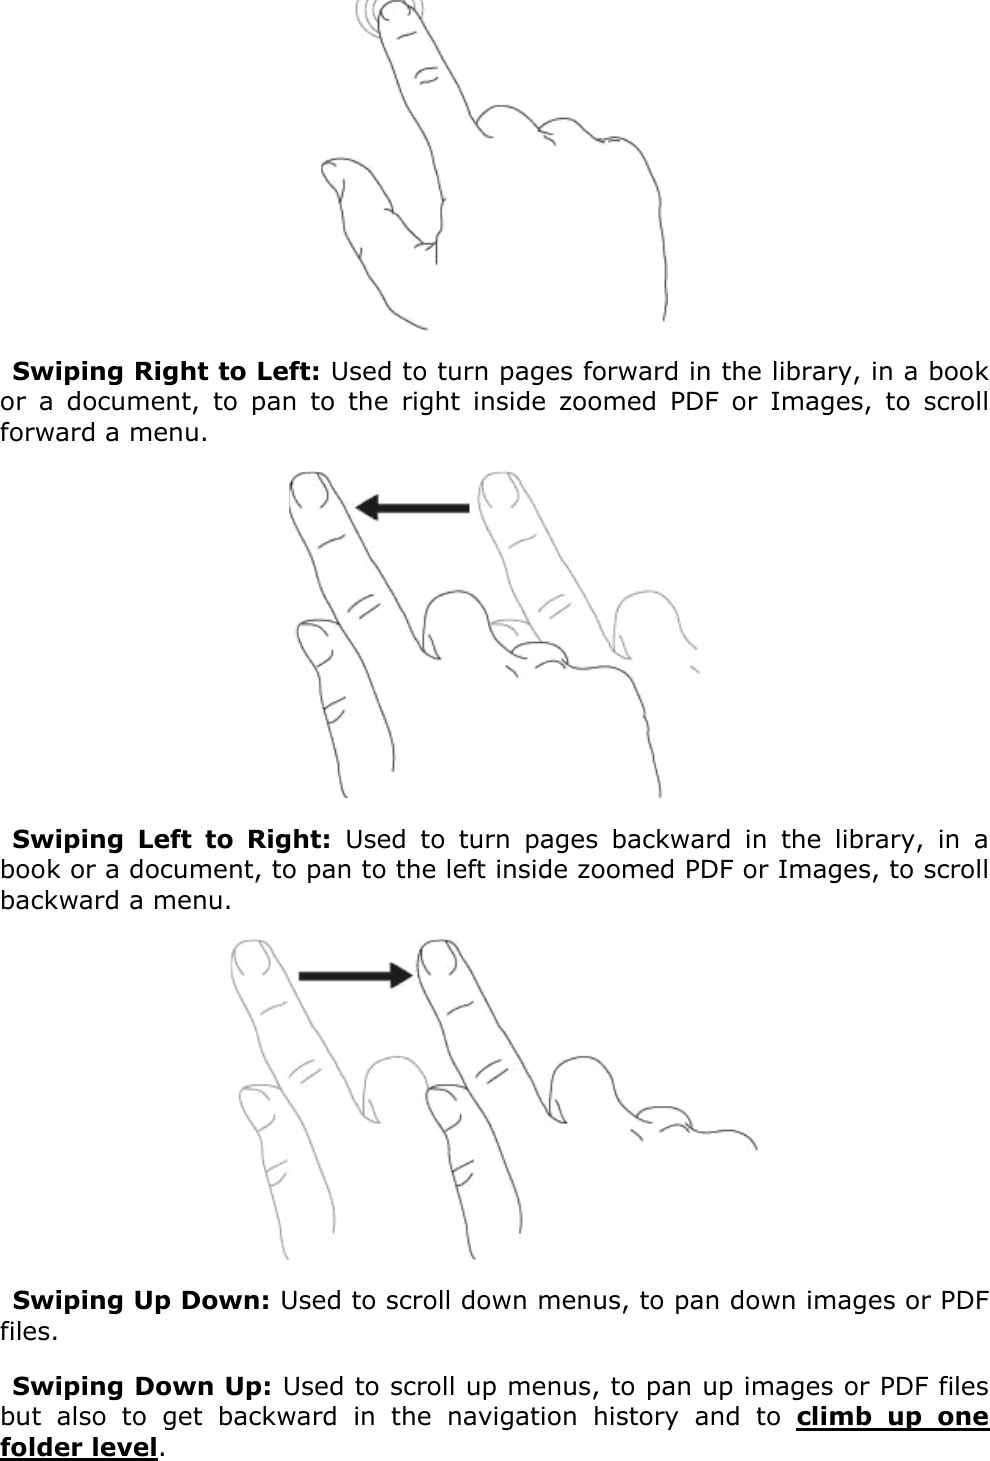  Swiping Right to Left: Used to turn pages forward in the library, in a book or  a  document,  to  pan  to  the  right  inside  zoomed  PDF  or  Images,  to  scroll forward a menu. Swiping  Left  to  Right:  Used  to  turn  pages  backward  in  the  library,  in  a book or a document, to pan to the left inside zoomed PDF or Images, to scroll backward a menu. Swiping Up Down: Used to scroll down menus, to pan down images or PDF files.Swiping Down Up: Used to scroll up menus, to pan up images or PDF files but  also  to  get  backward  in  the  navigation  history  and  to  climb  up  one folder level.